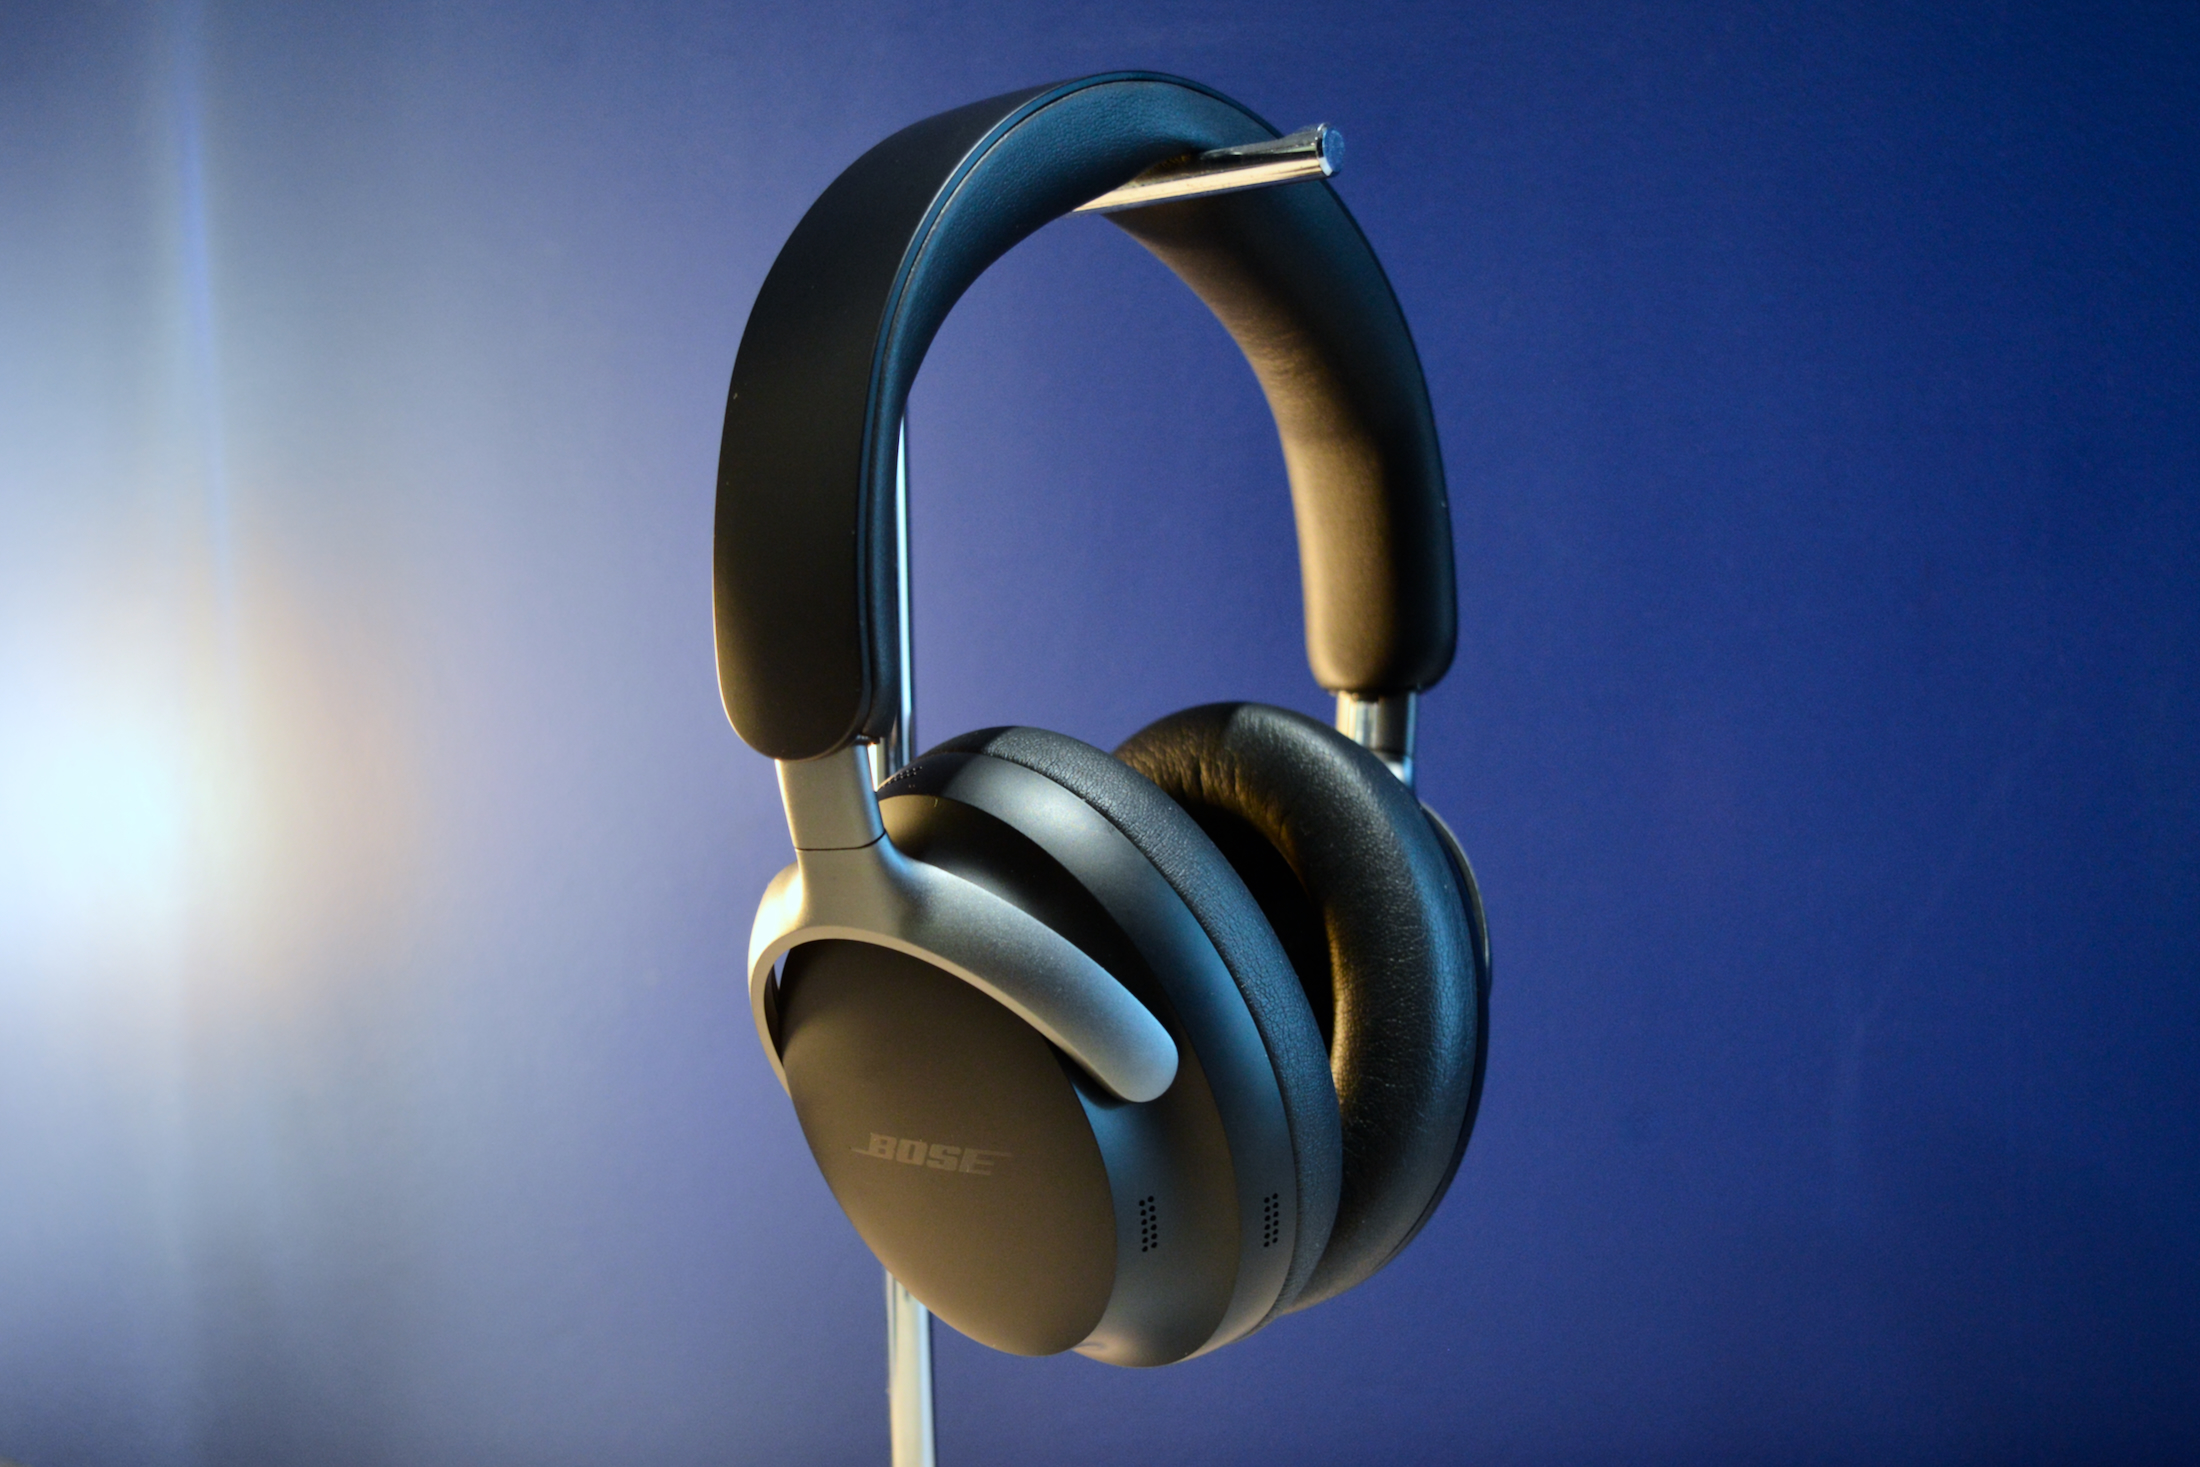 Review of the new Bose QuietComfort Ultra Headphones (over ear